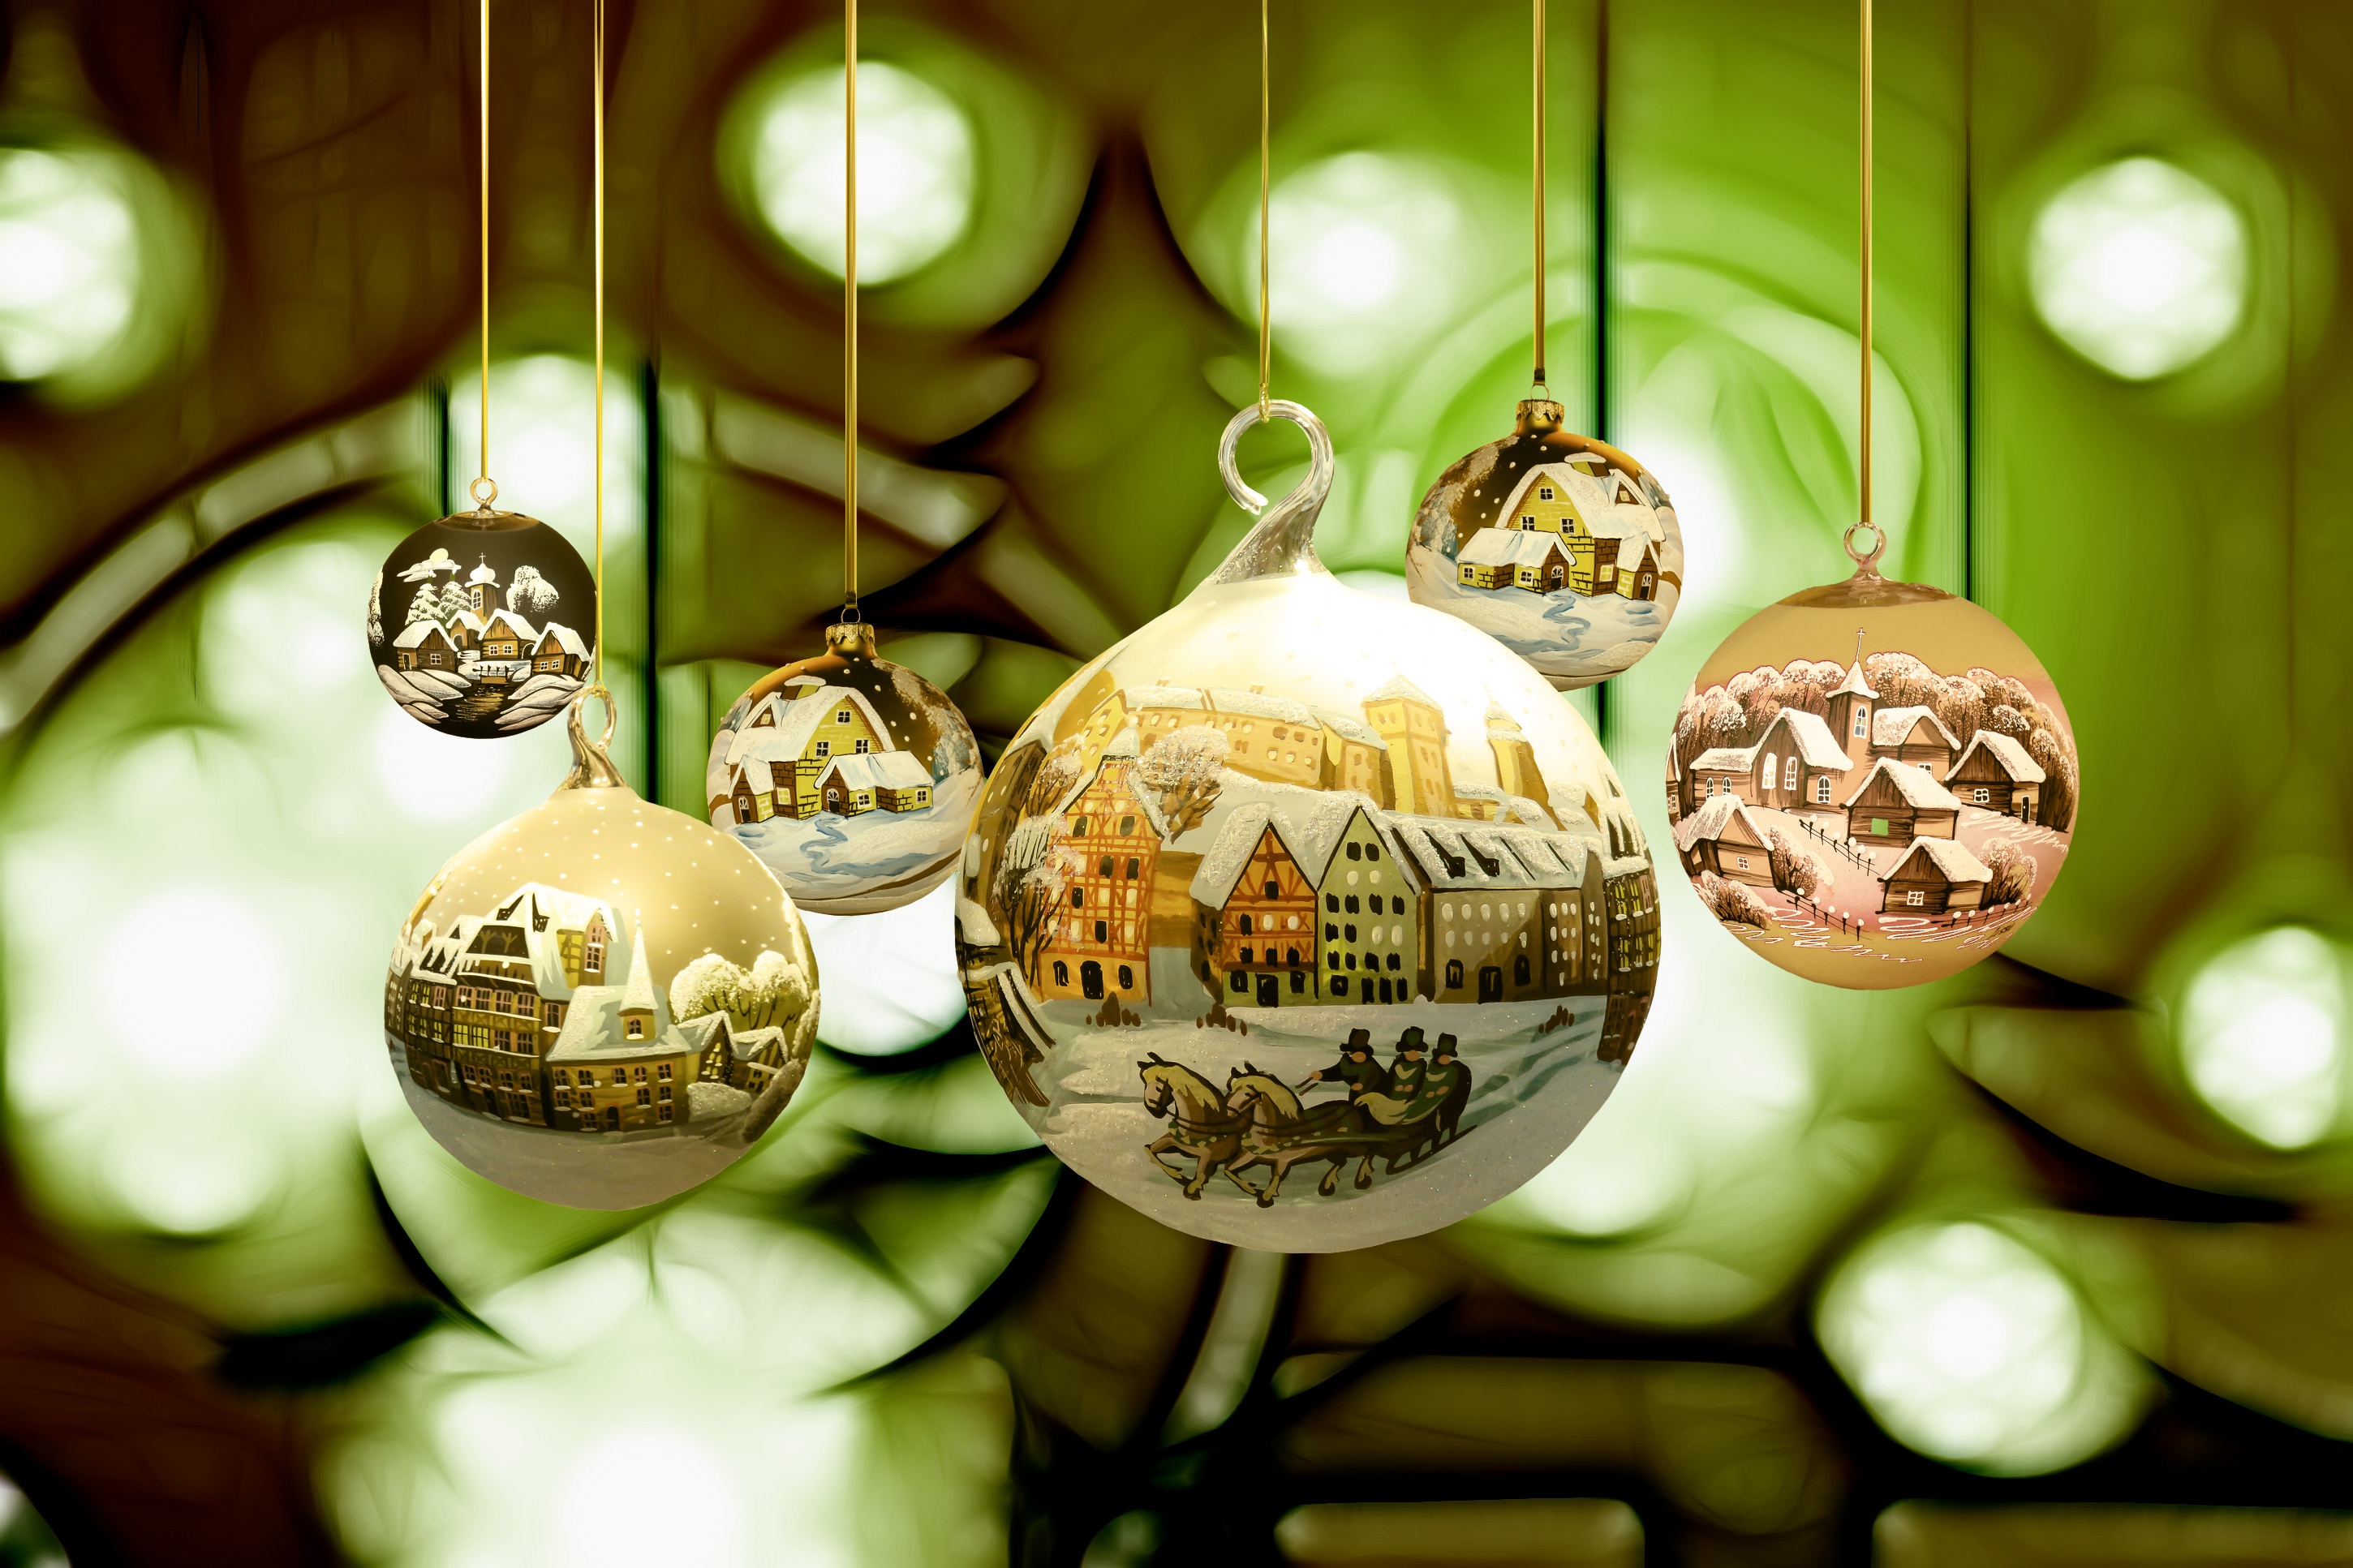 Painted Christmas Baubles by Gerd Altmann